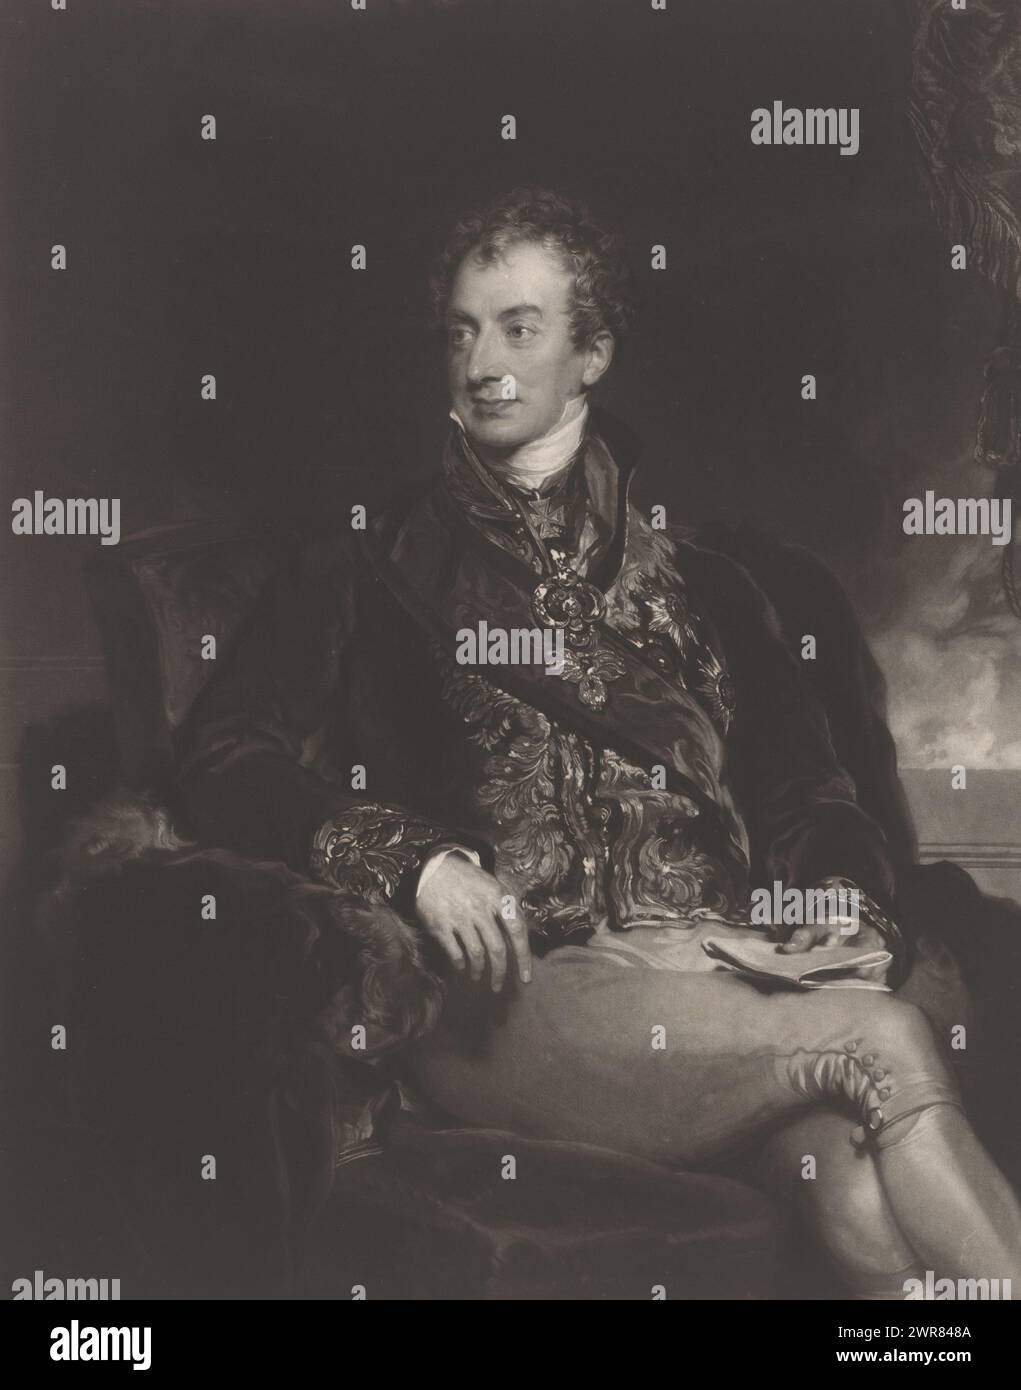 Portrait of Klemens Wenzel Lothar von Metternich, Portrait of Klemens von Metternich, Text in English in the bottom margin., print maker: Samuel Cousins, after design by: Thomas Lawrence, publisher: Colnaghi & Co, London, 1-Sep-1830, paper, height 305 mm × width 378 mm, print Stock Photo